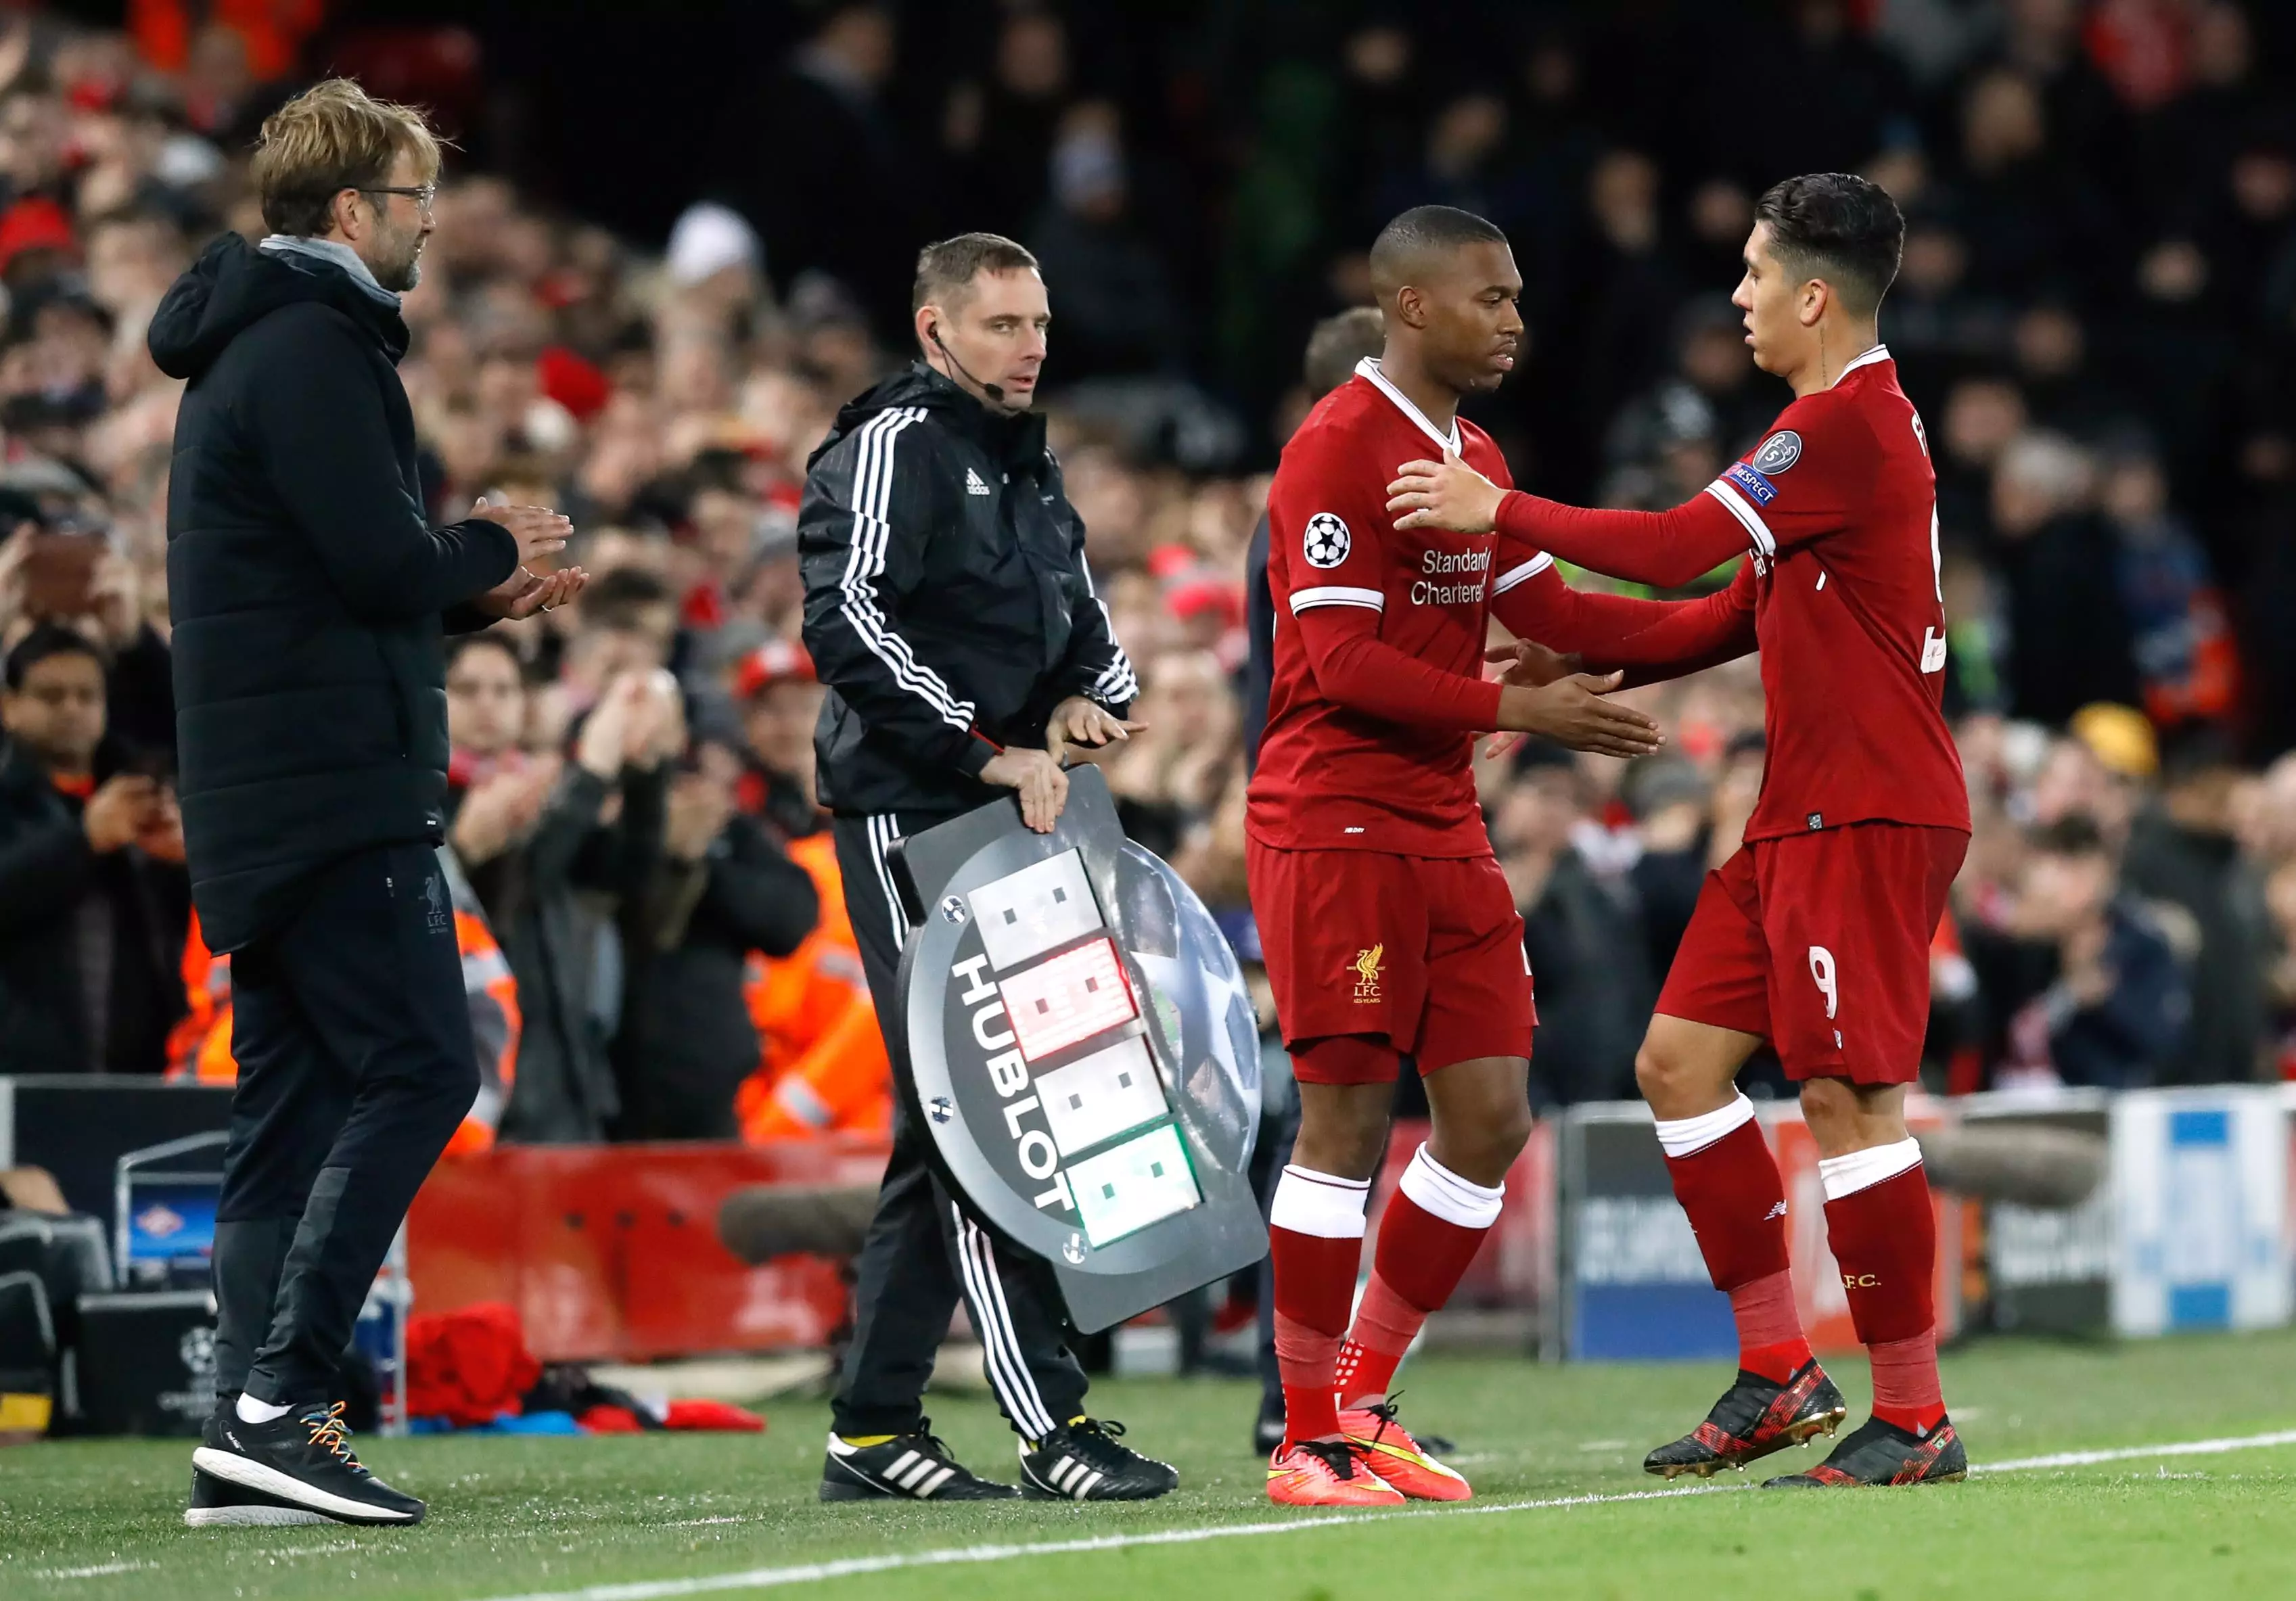 Sturridge has seen a lot of his football from off the bench this season. Image: PA Images.